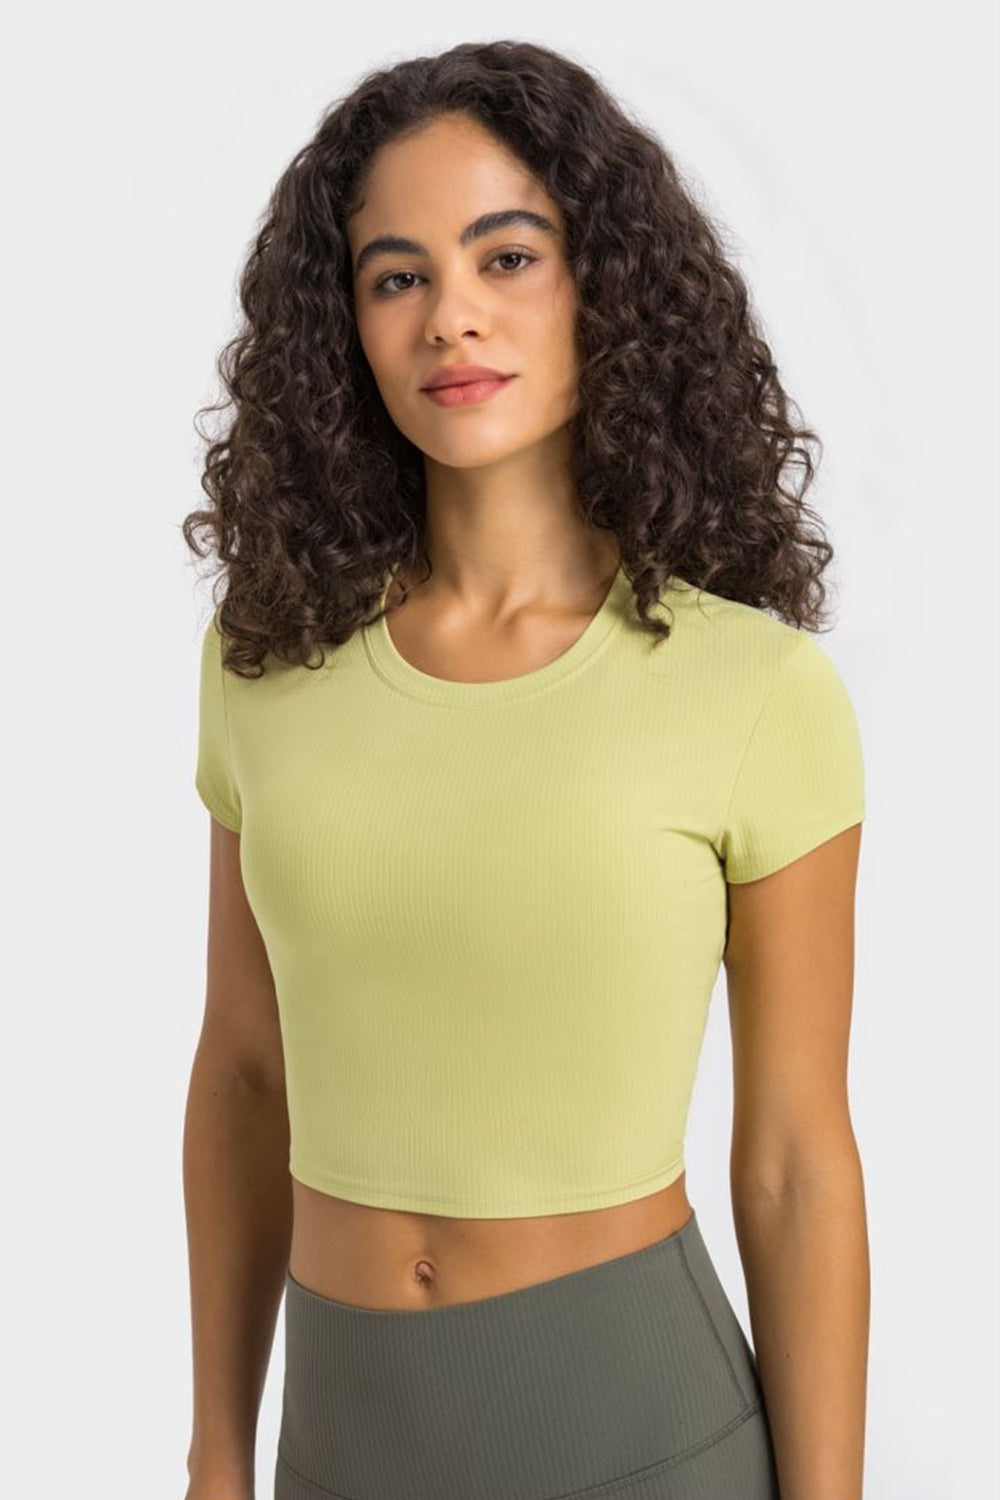 Round Neck Short Sleeve Cropped Sports T-Shirt - Crop Tops & Tank Tops - FITGGINS